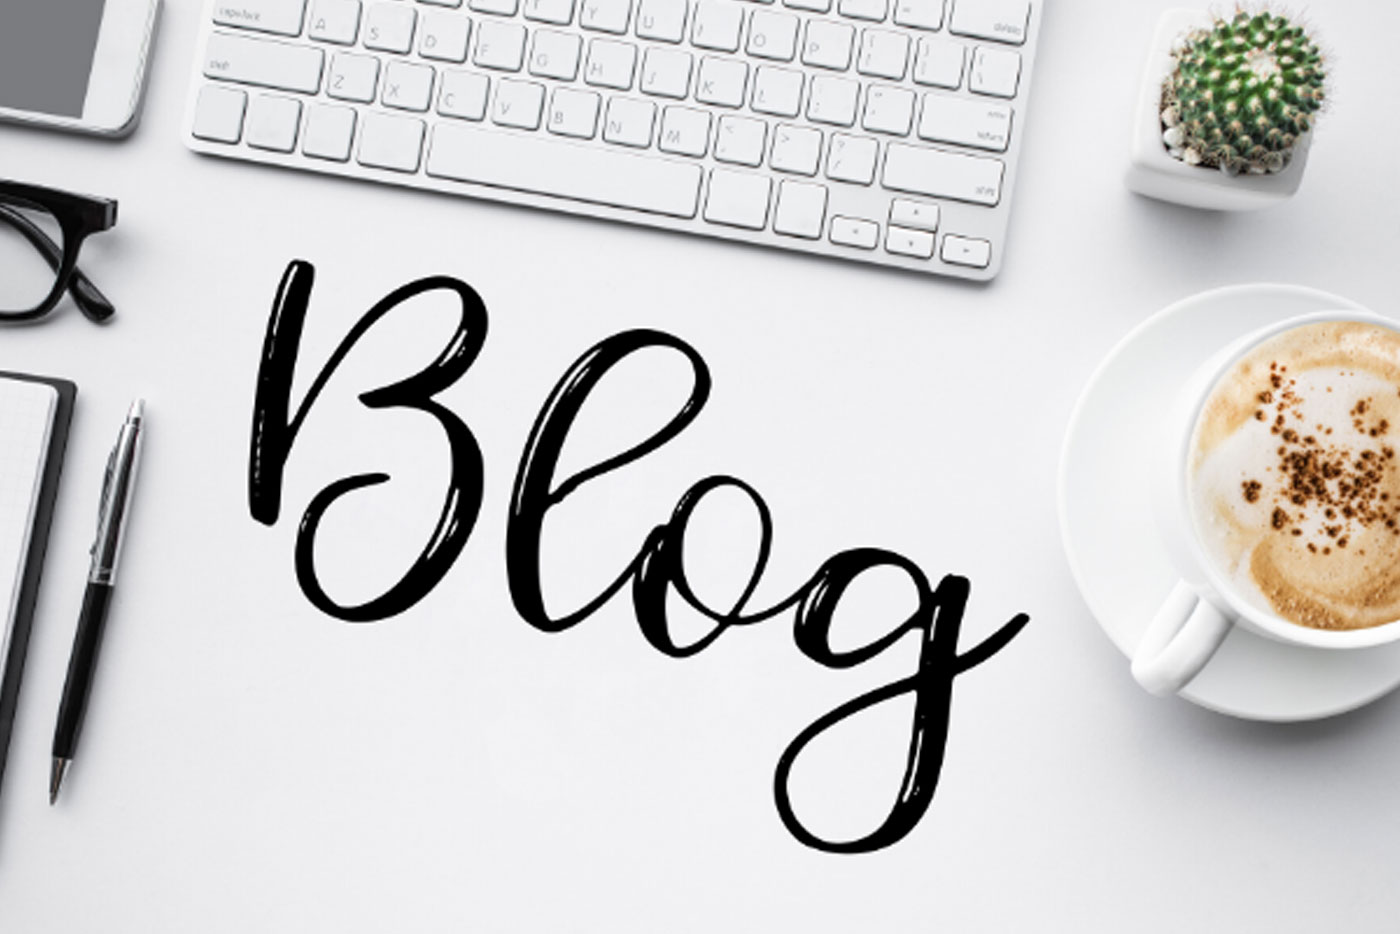 How do companies use blogs as marketing tools